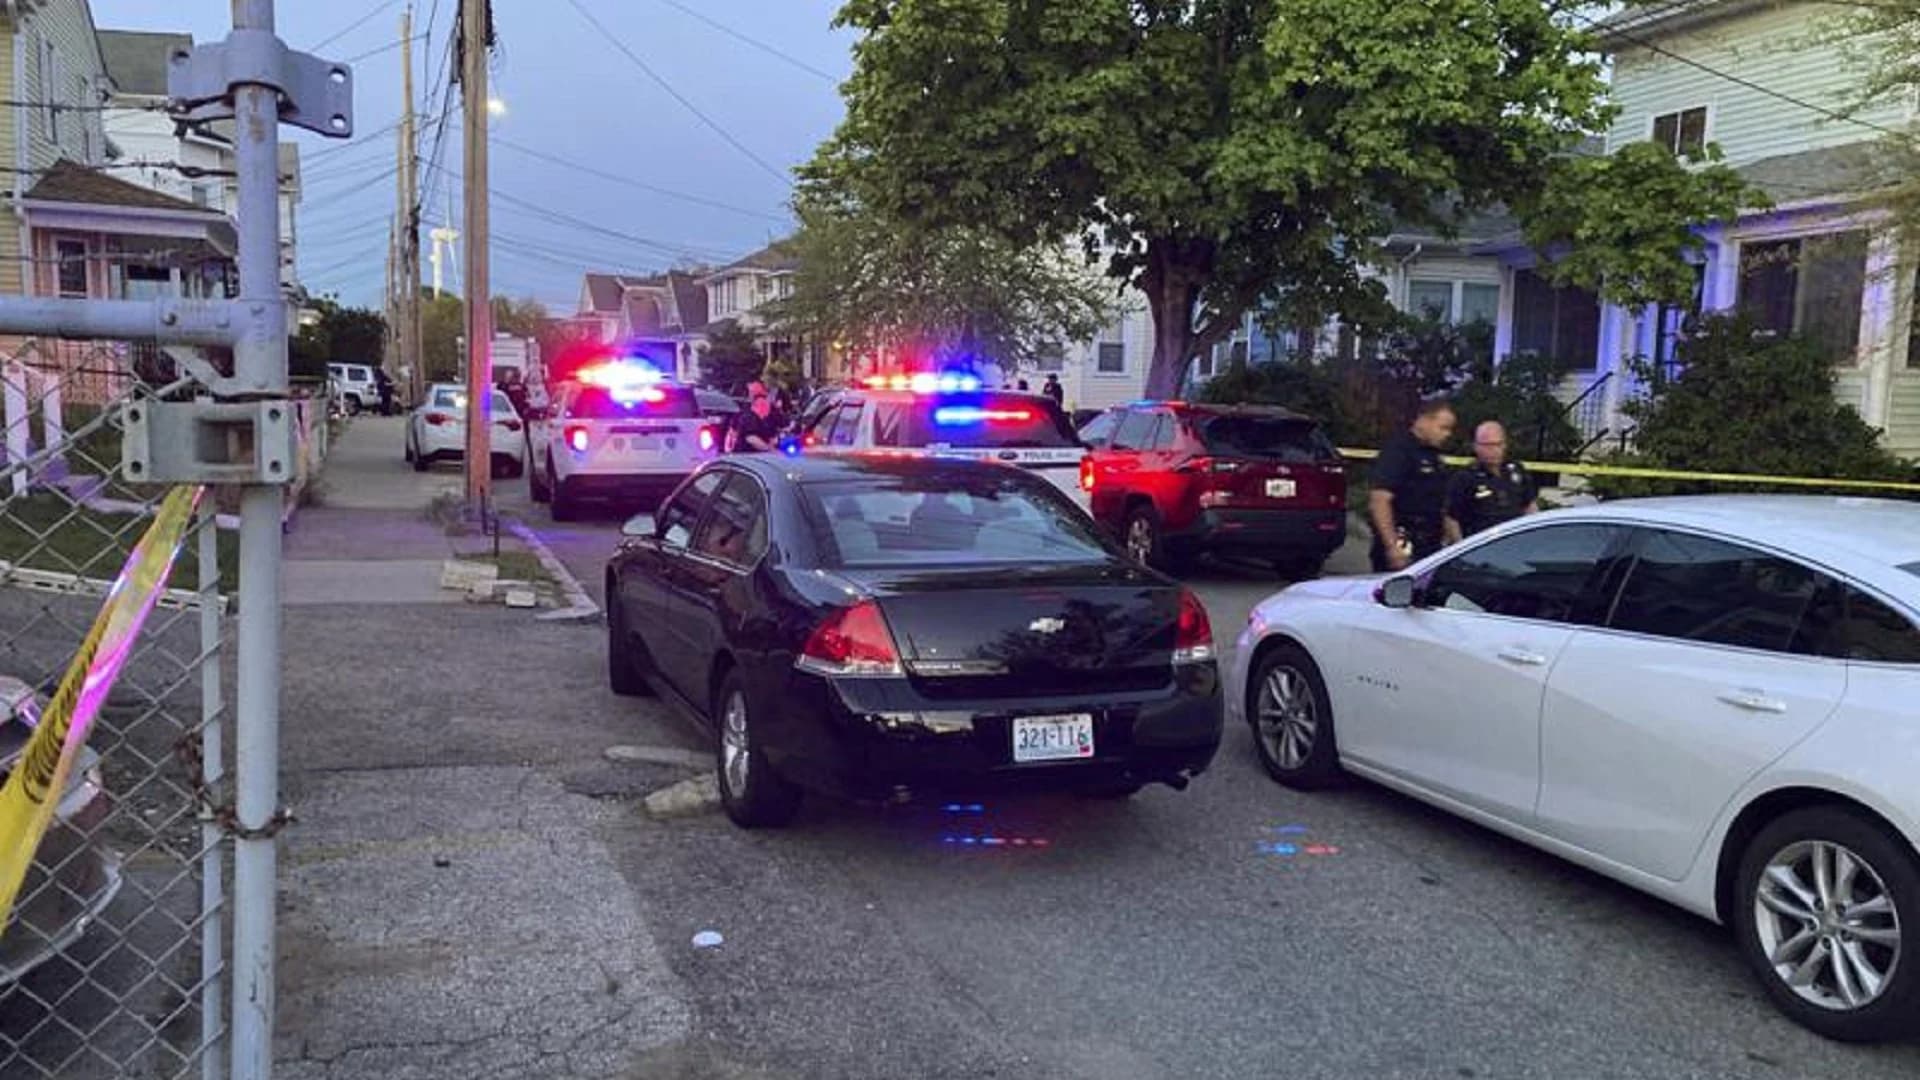 Police: 9 wounded in Providence, Rhode Island, shooting